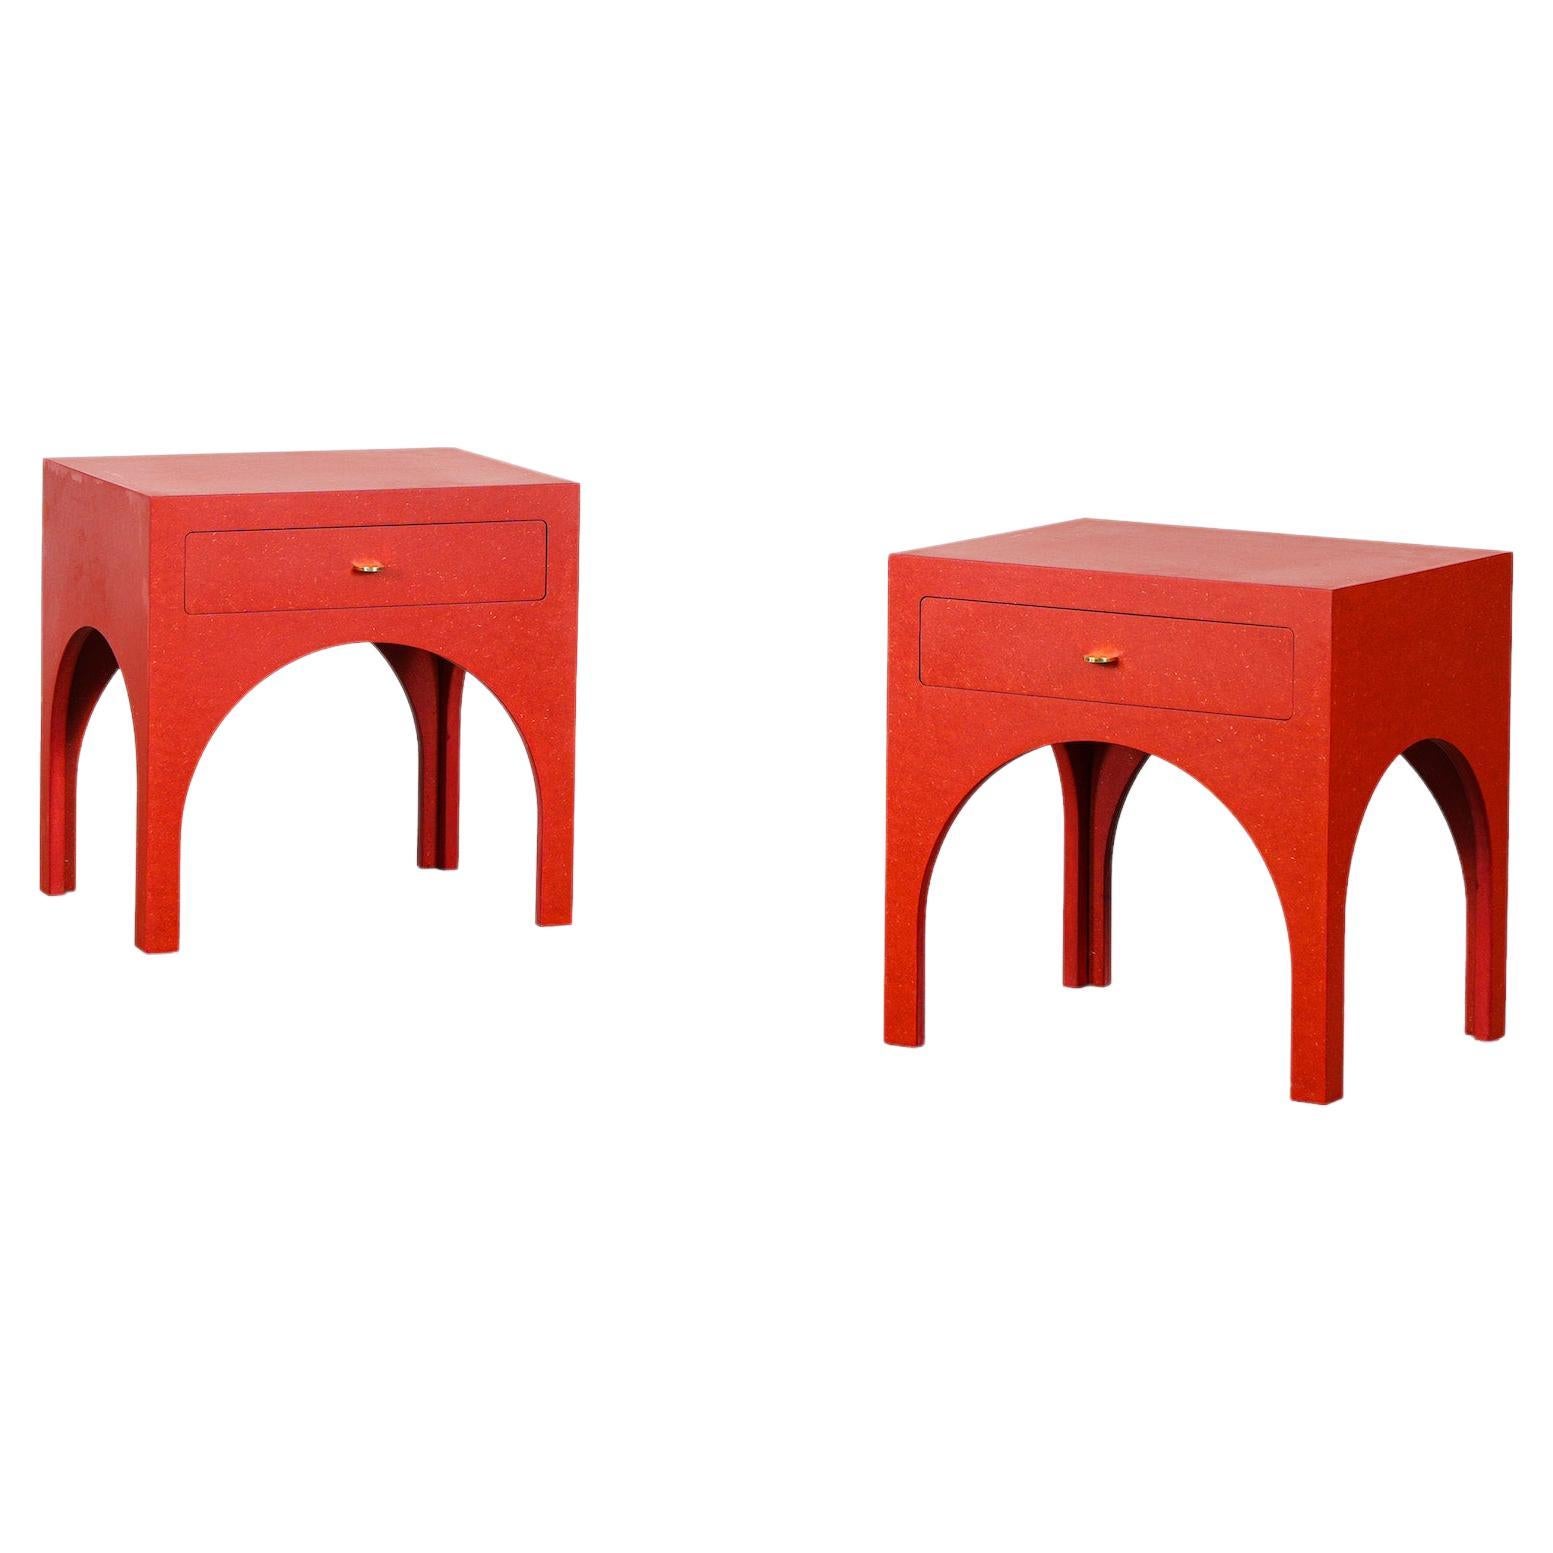 Pair of Red Minimalist Nightstands Side Tables by Atelier Bachmann, 2019